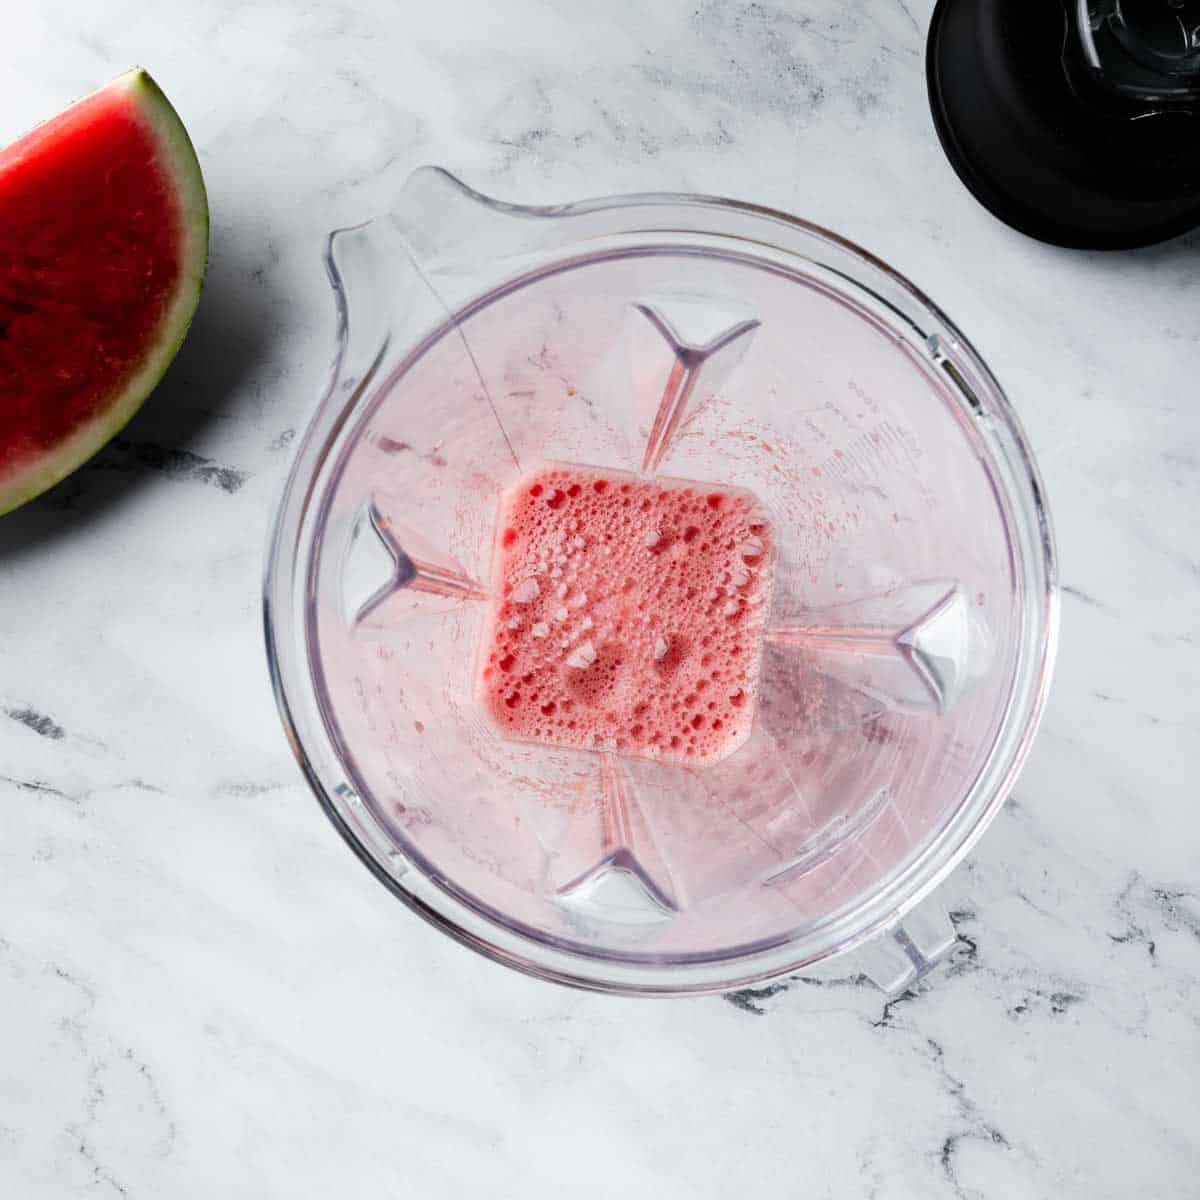 Pureed watermelon in a blender